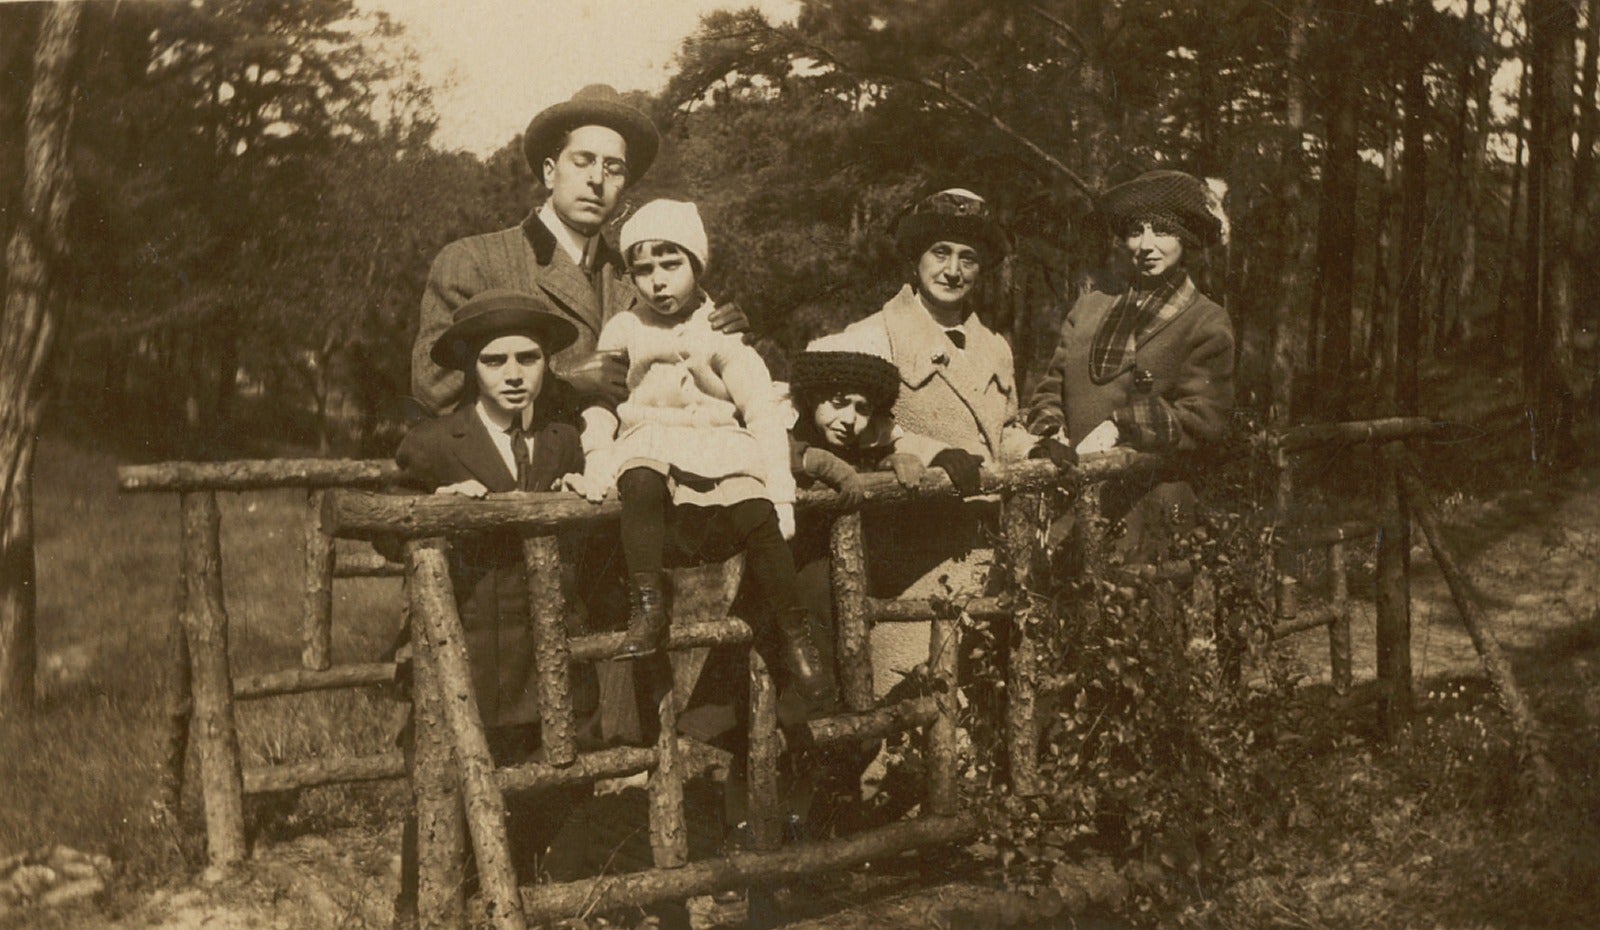 Maria Branyas, third from the left, with her family in New Orleans in 1911